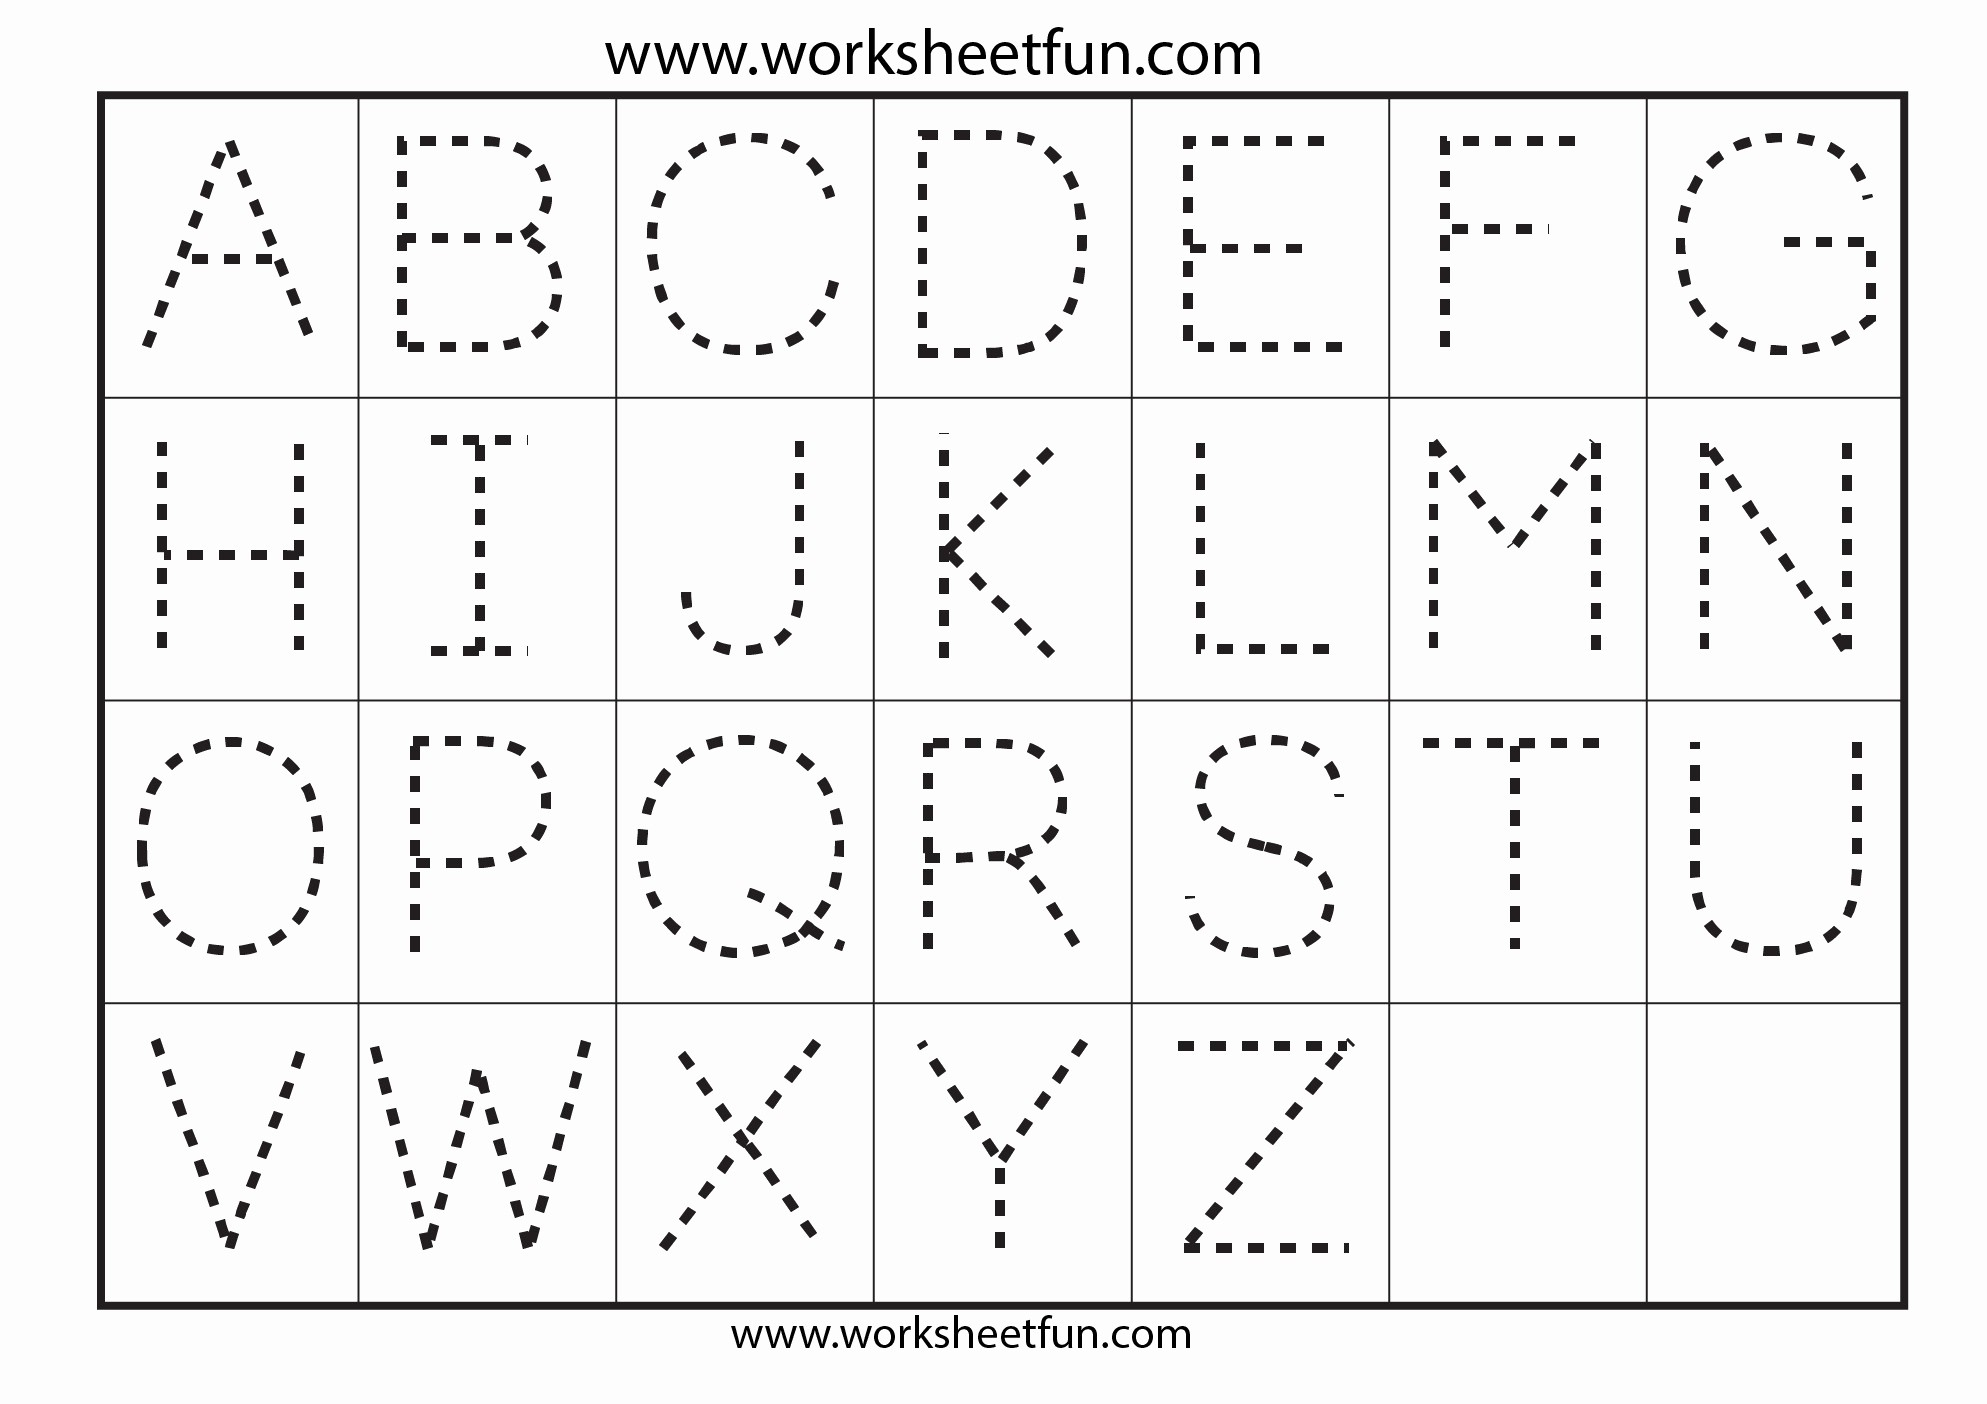 Preschool Practice Worksheets – With Lesson Plans Also Free | Vpk Printable Worksheets